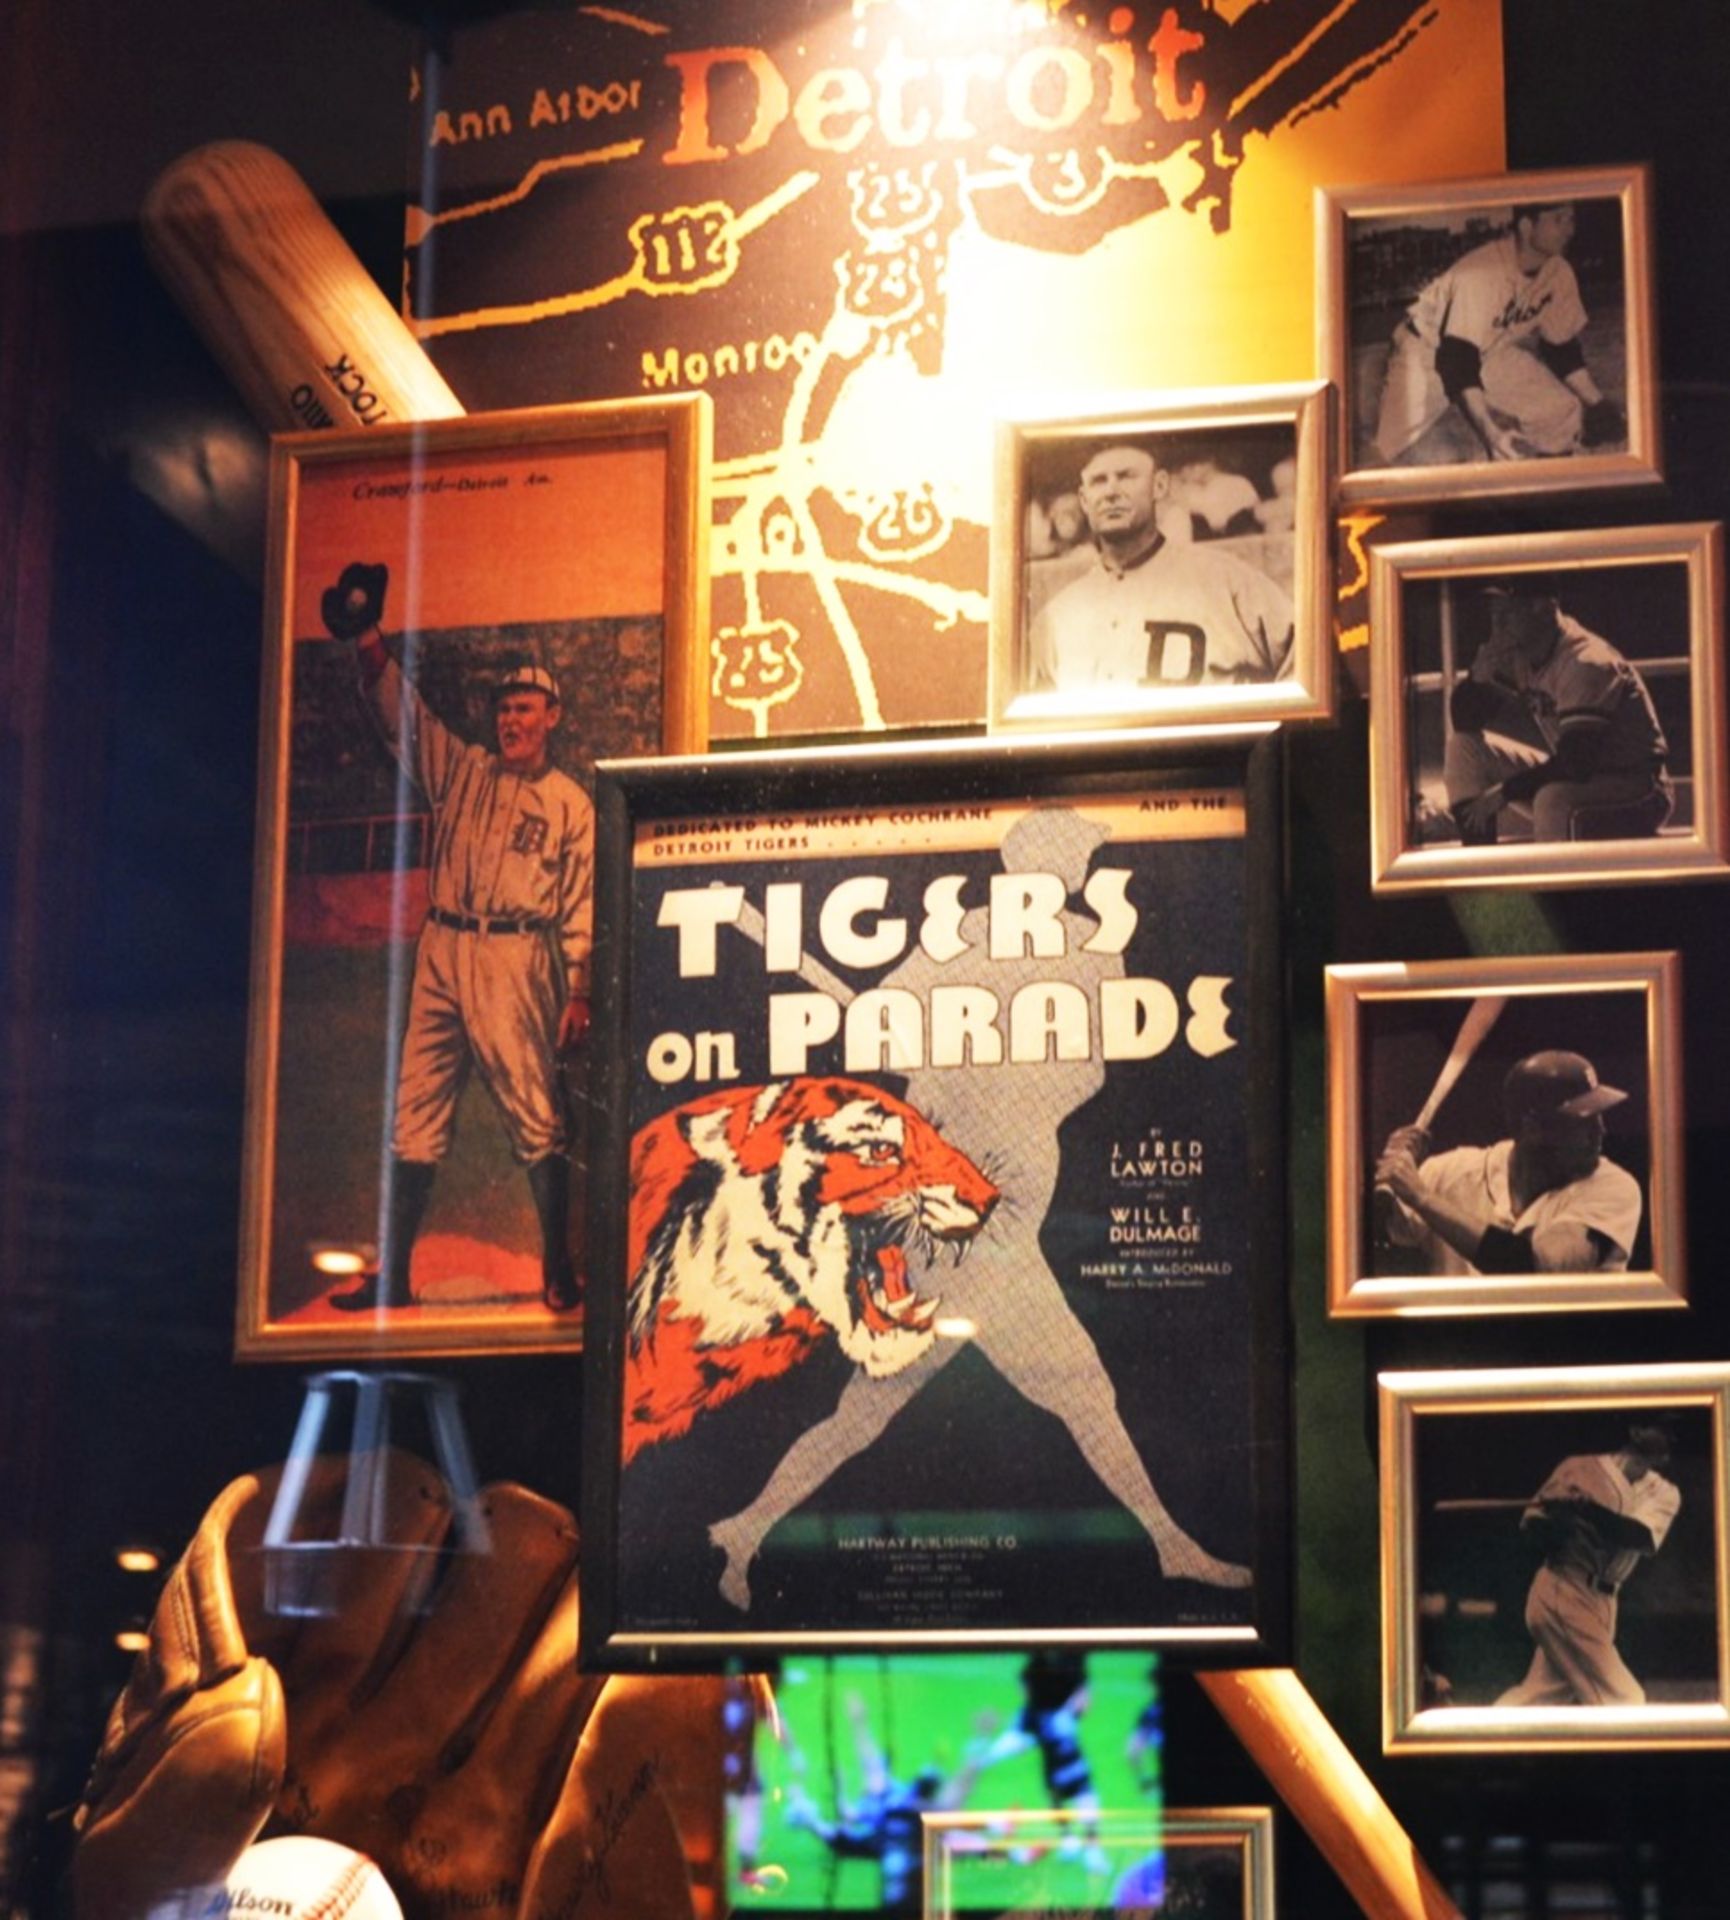 1 x Americana Wall Mounted Illuminated Display Case - DETROIT TIGERS BASEBALL - Includes Various - Image 3 of 5